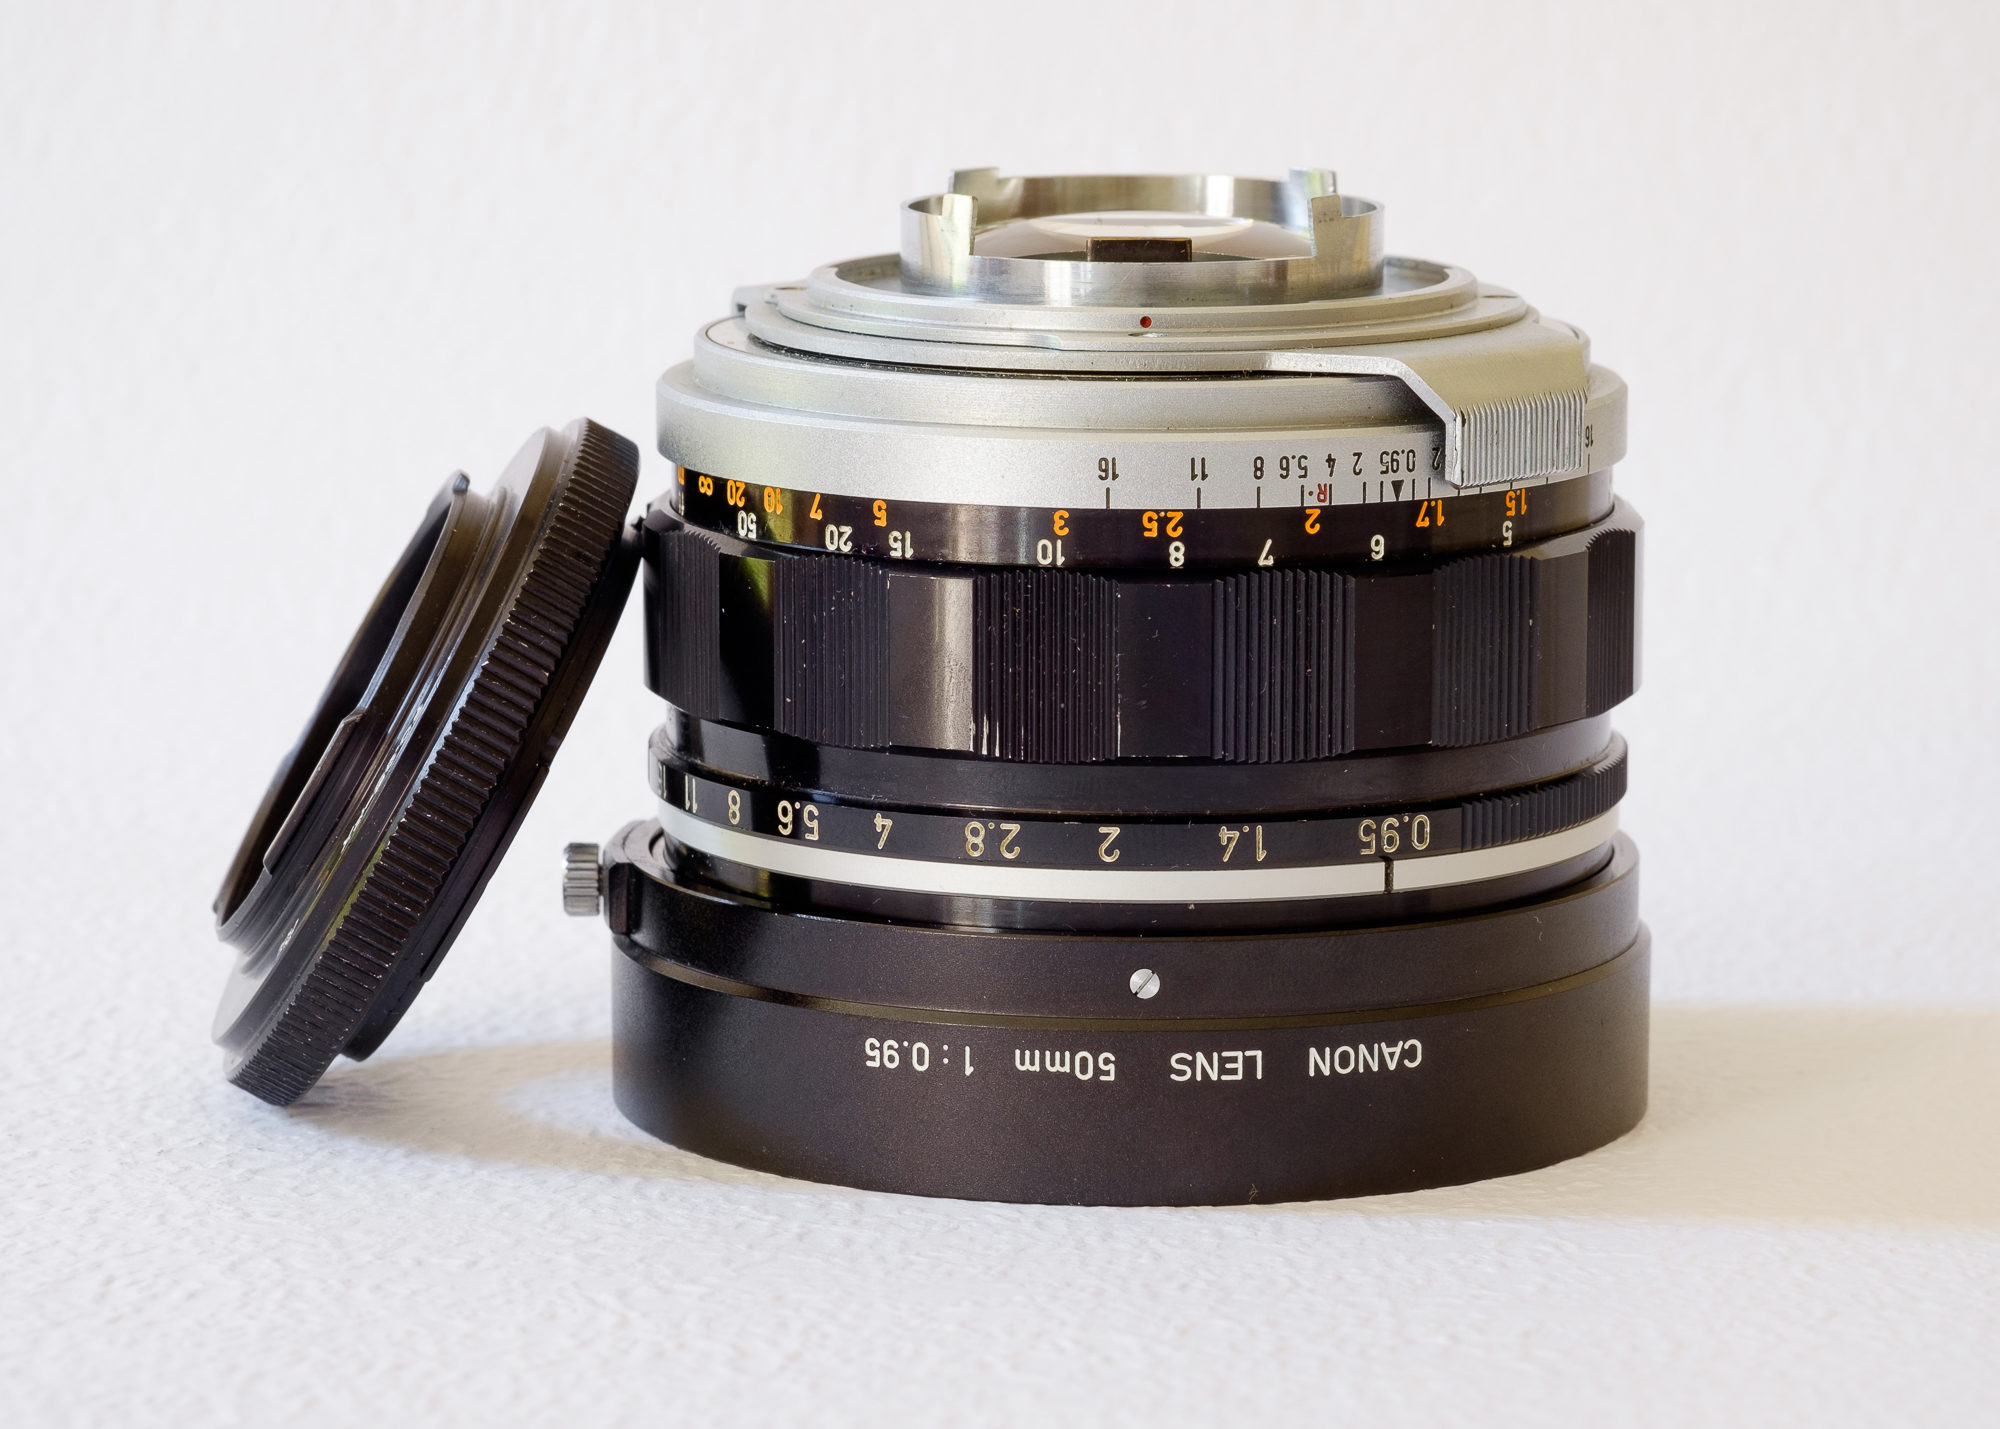 Canon 50mm f/0.95 “dream lens” on the Fujifilm XT1 and X